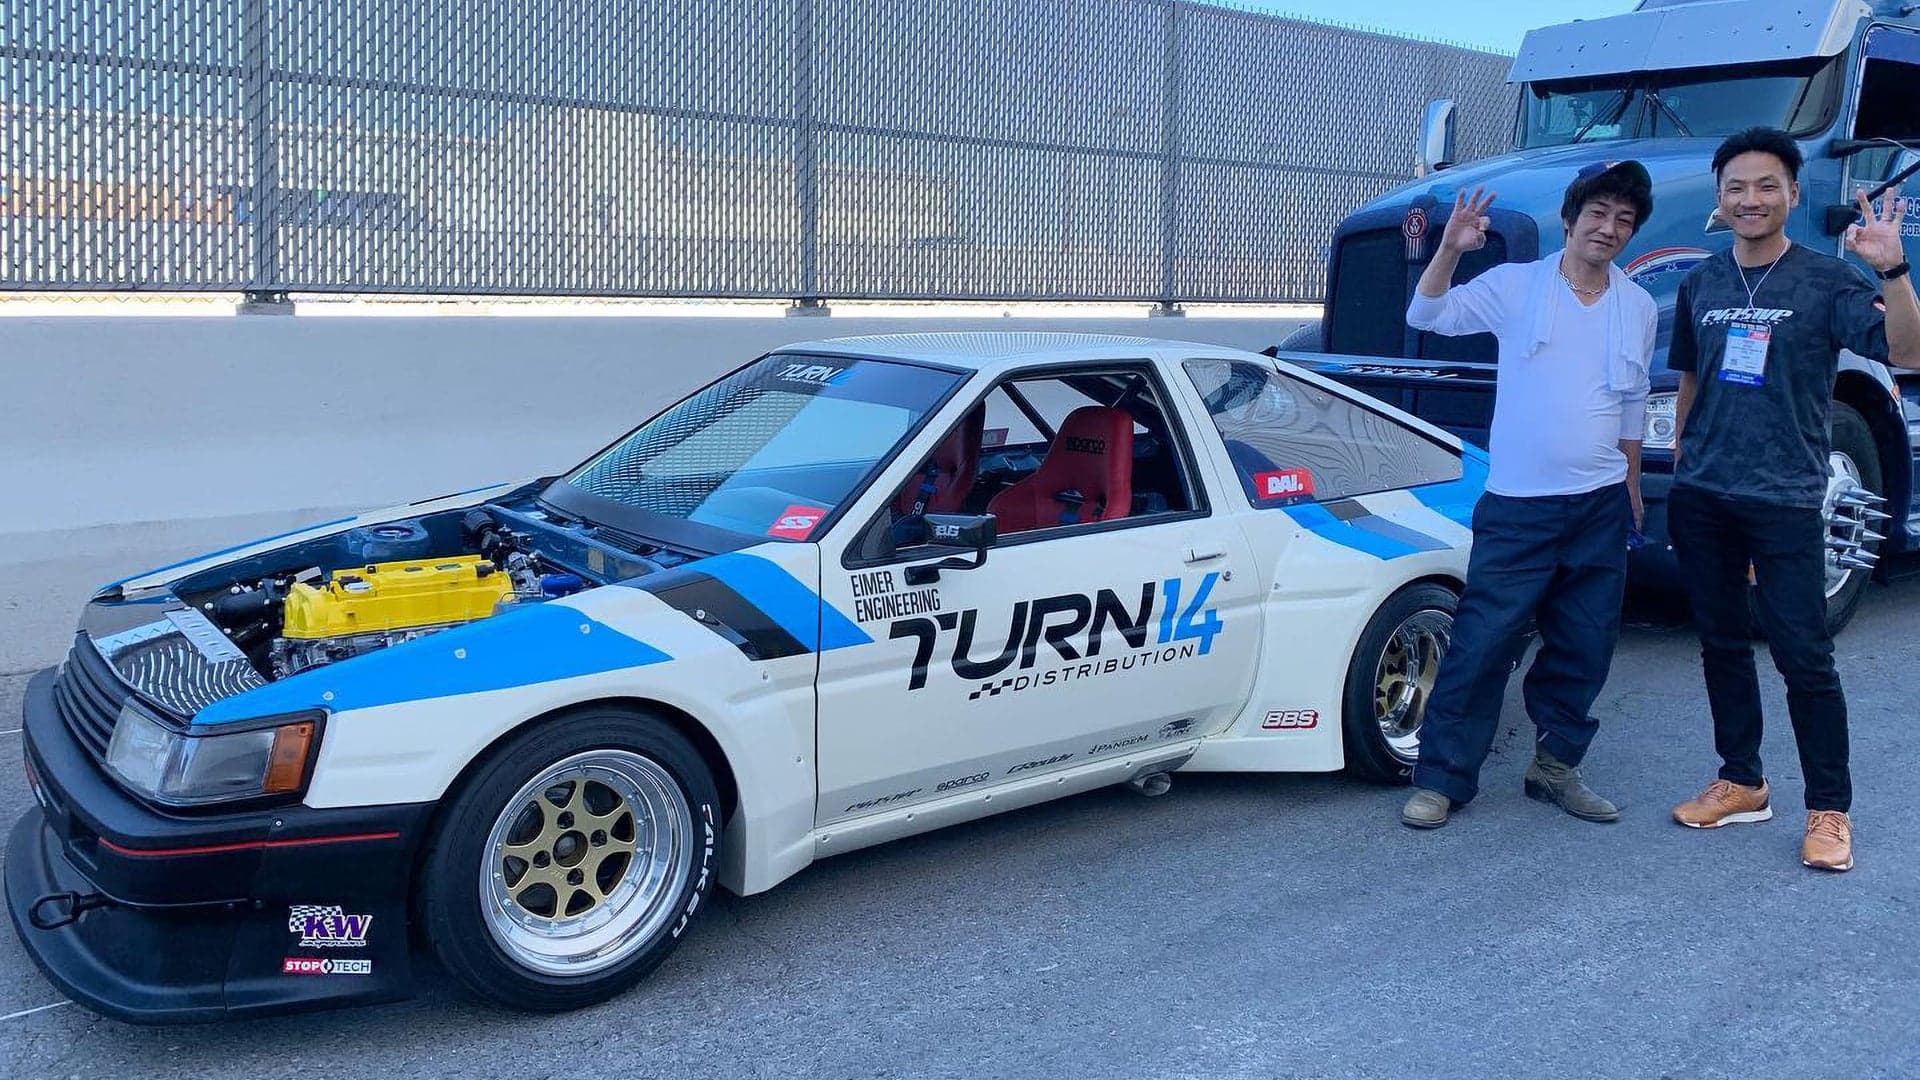 This Toyota Corolla AE86 Drift Car Is Powered by a New Honda Civic Type R Engine